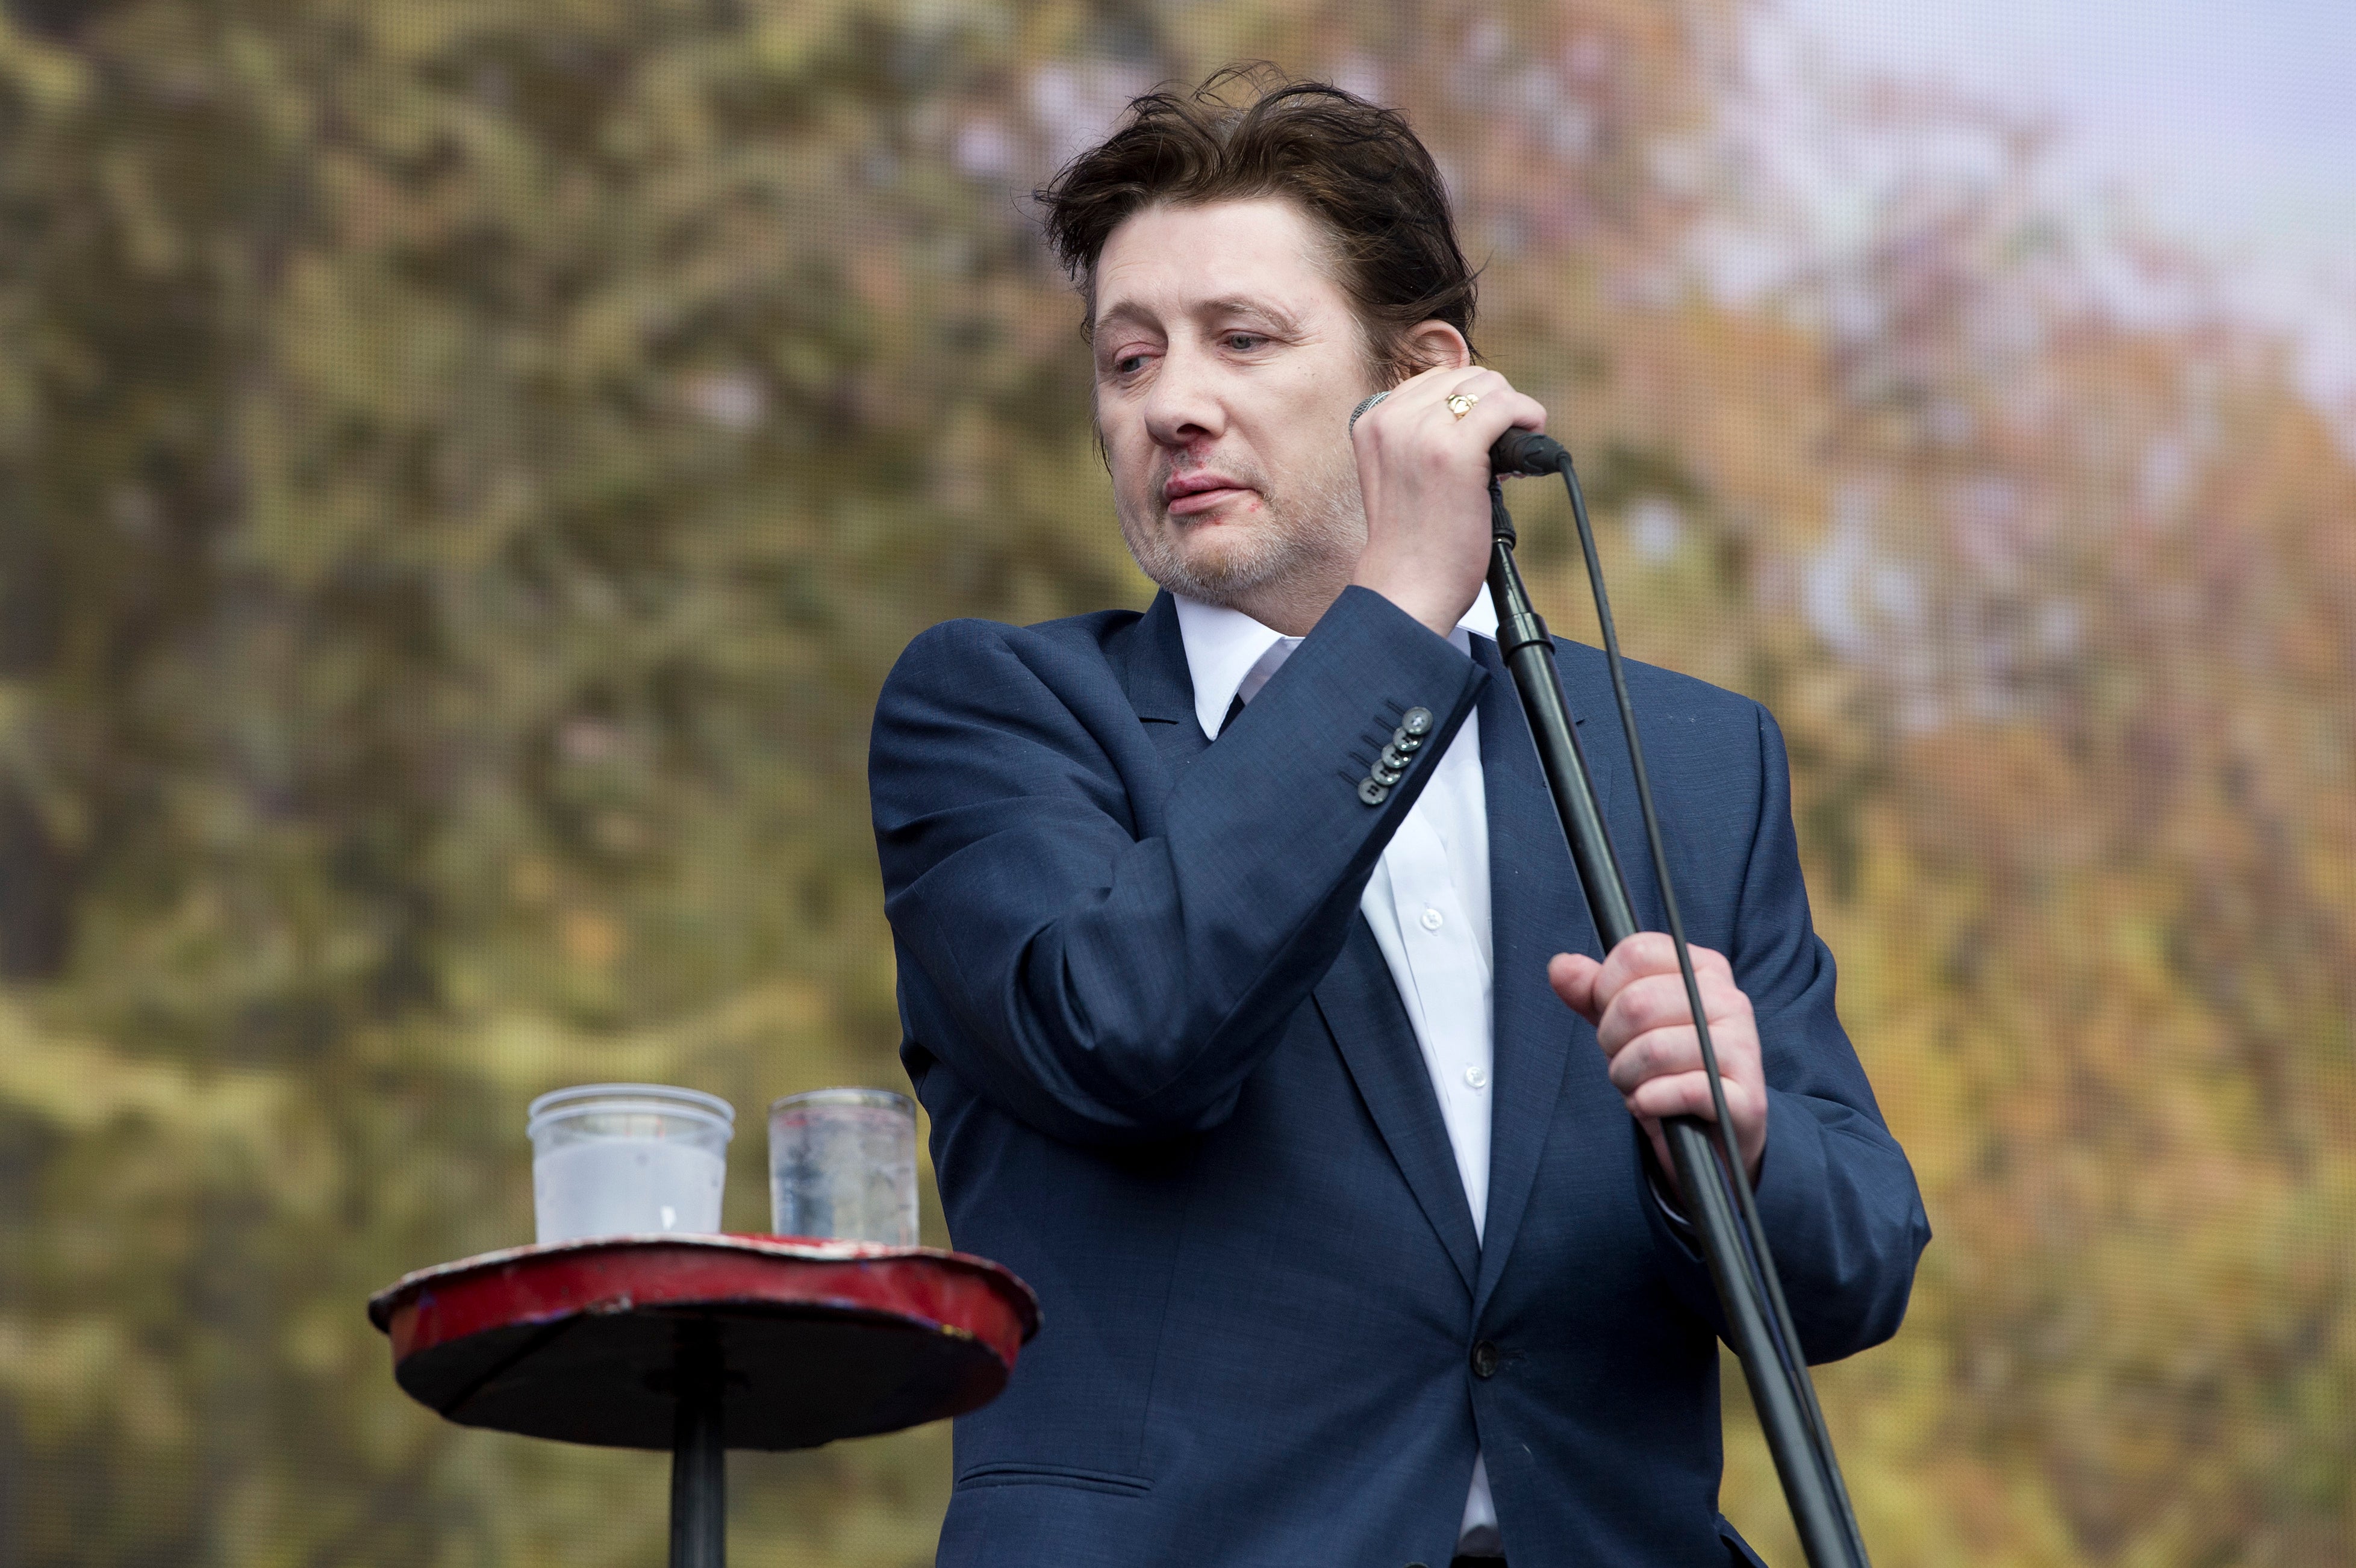 MacGowan at 2014’s Barclaycard British Summer Time Festival in Hyde Park, London